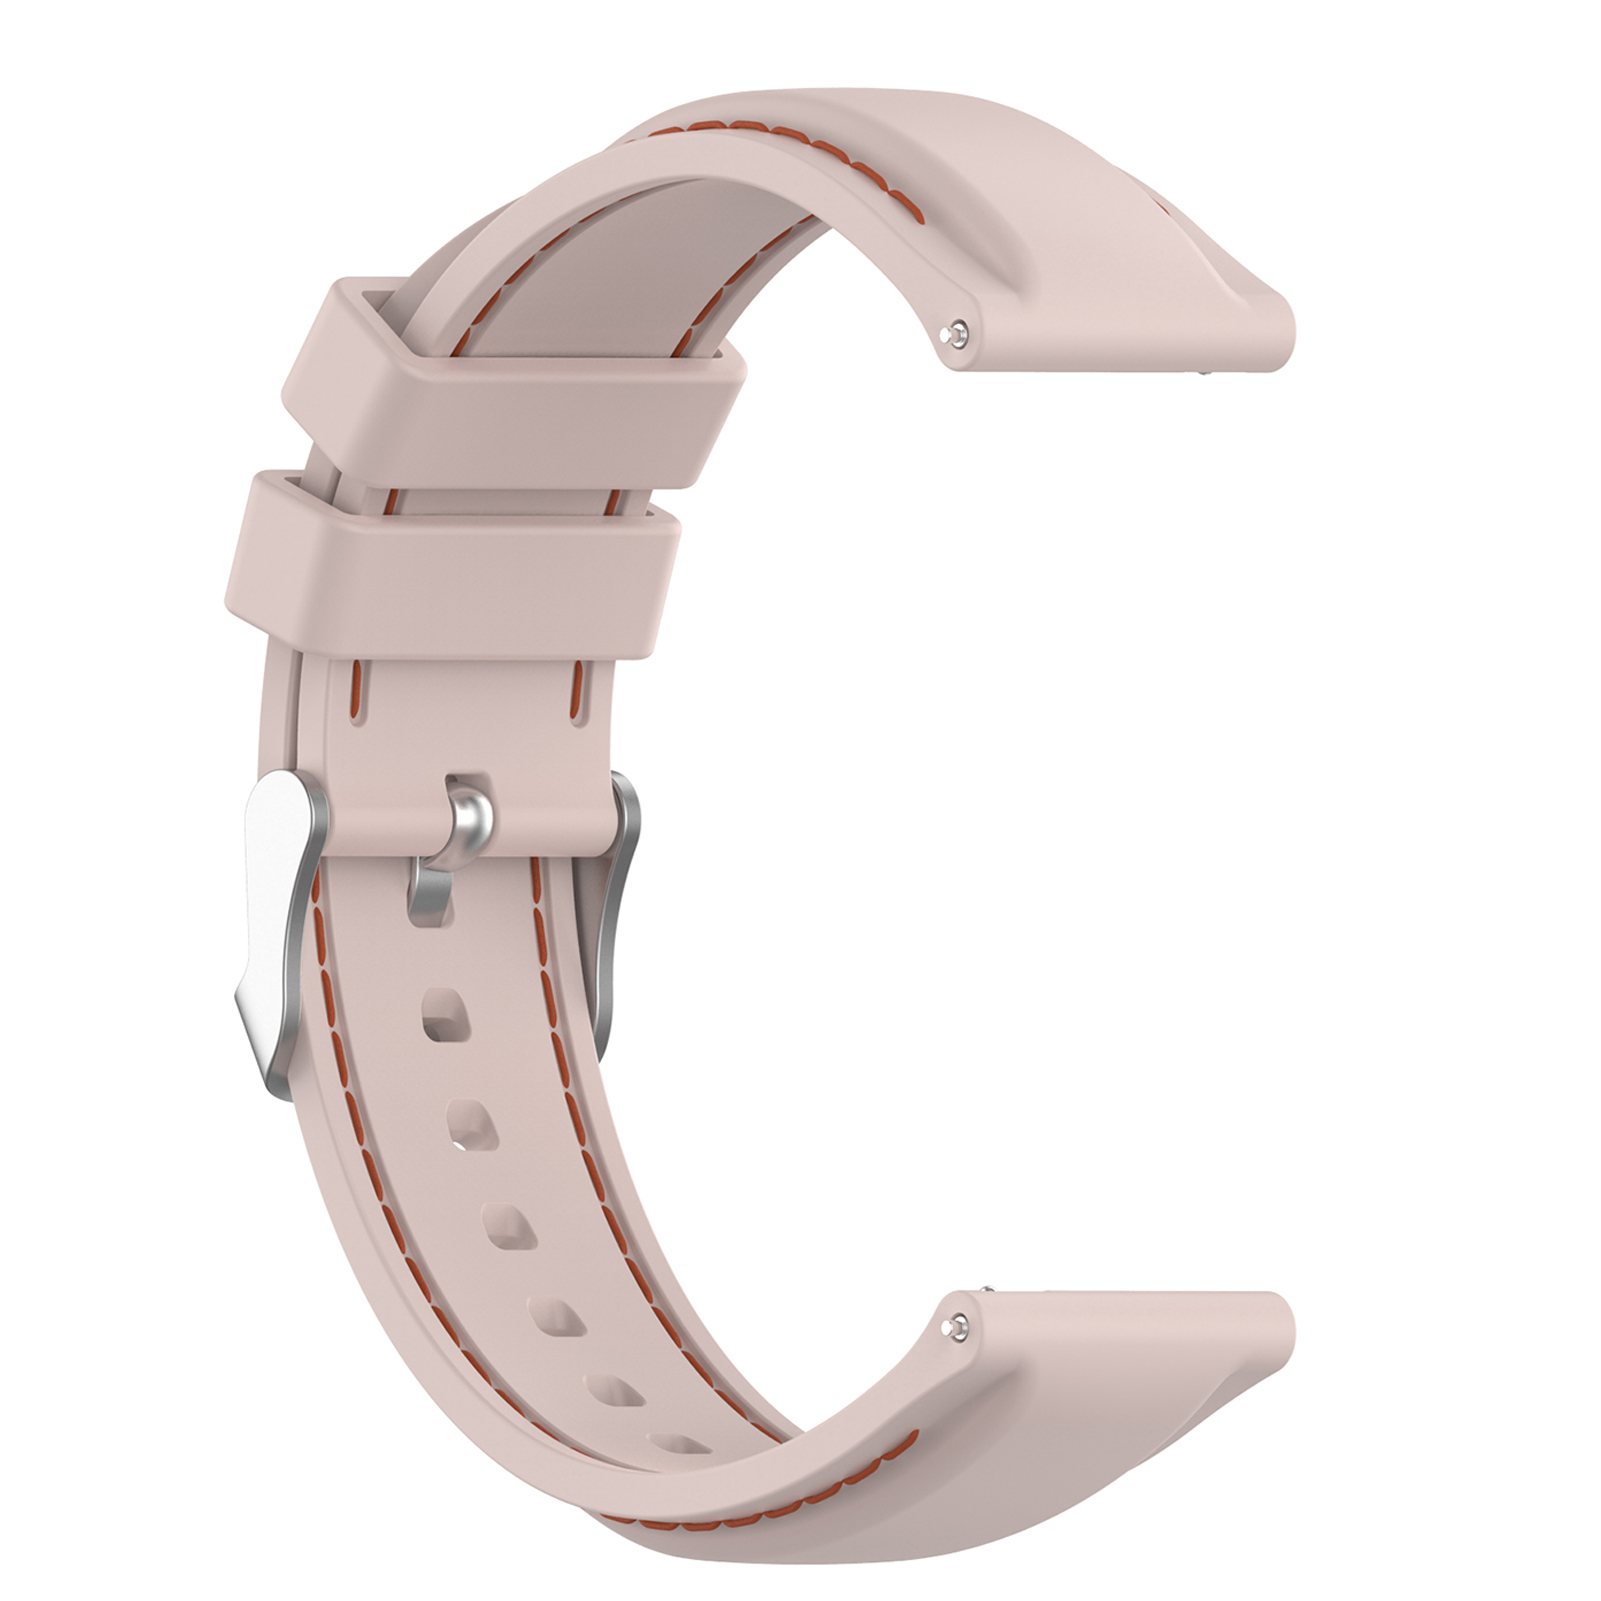 22mm-Soft-Silicone-Watch-Strap-Band-Replacement-Sport-Bracelet-Watchband-For-Ticwatch-Pro3LTE-Haylou-1809083-10